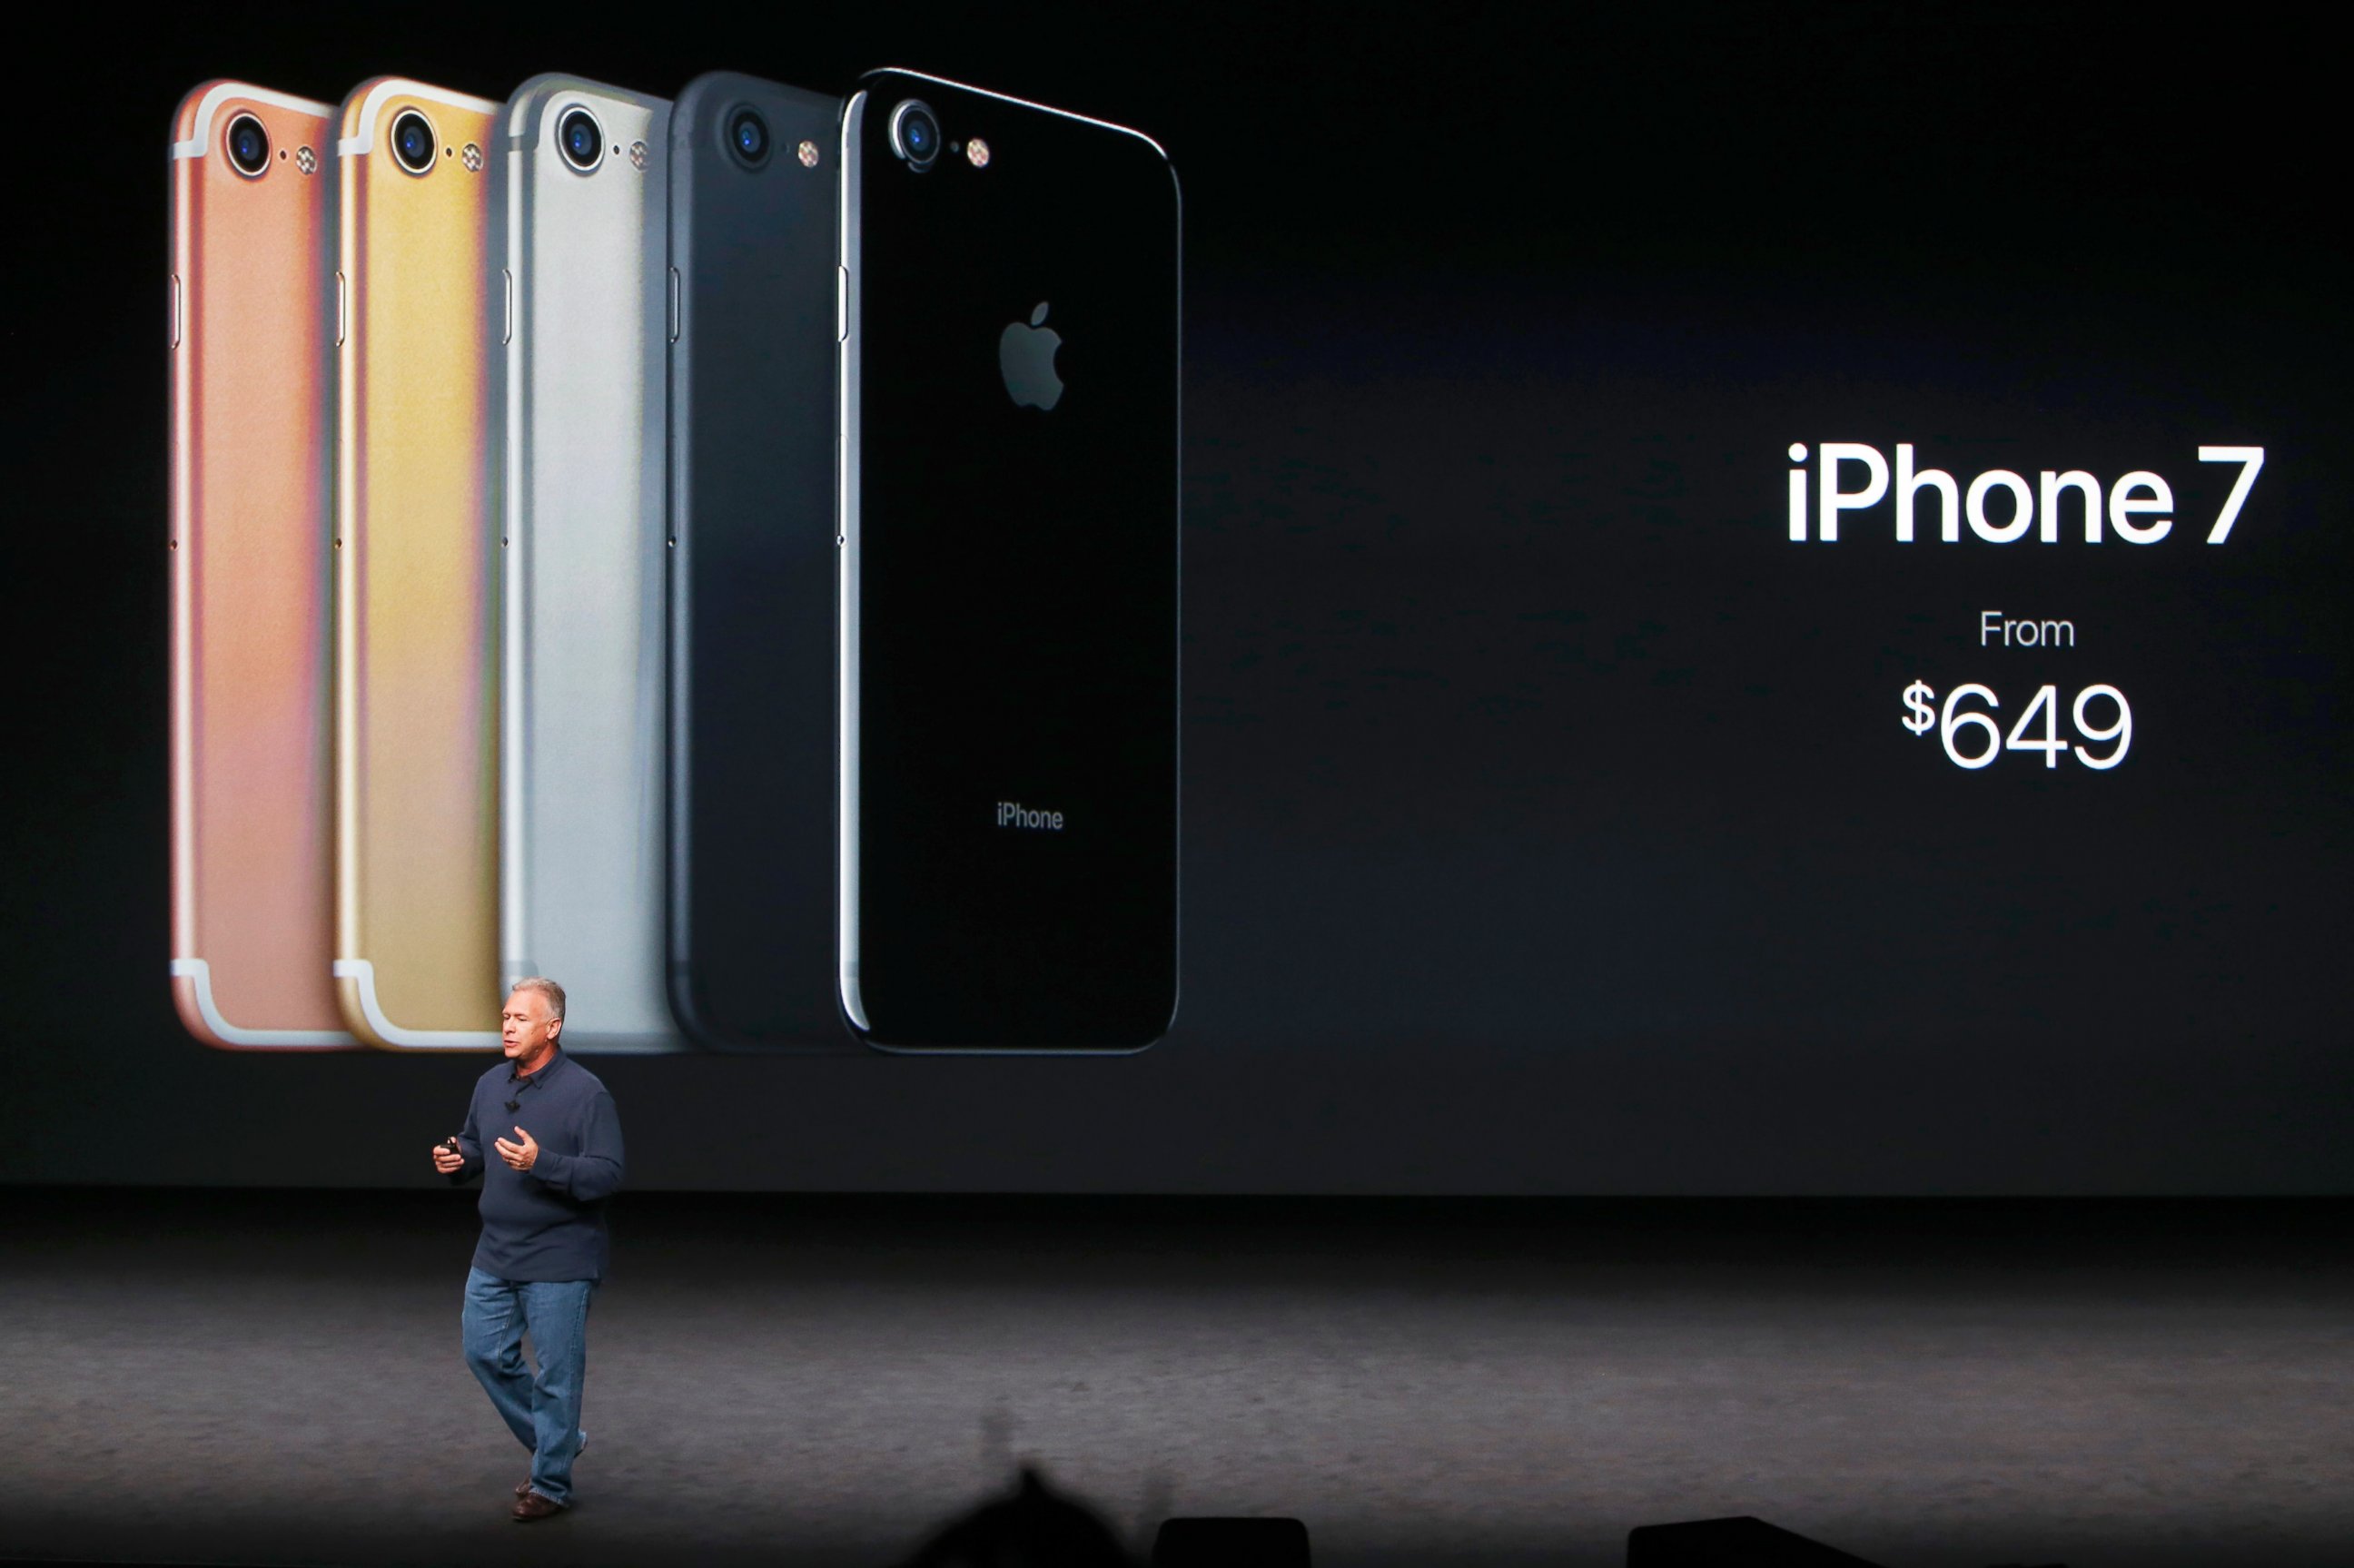 PHOTO: Phil Schiller, Senior Vice President of Worldwide Marketing at Apple Inc, discusses the iPhone 7 during an Apple media event in San Francisco, Sept. 7, 2016.